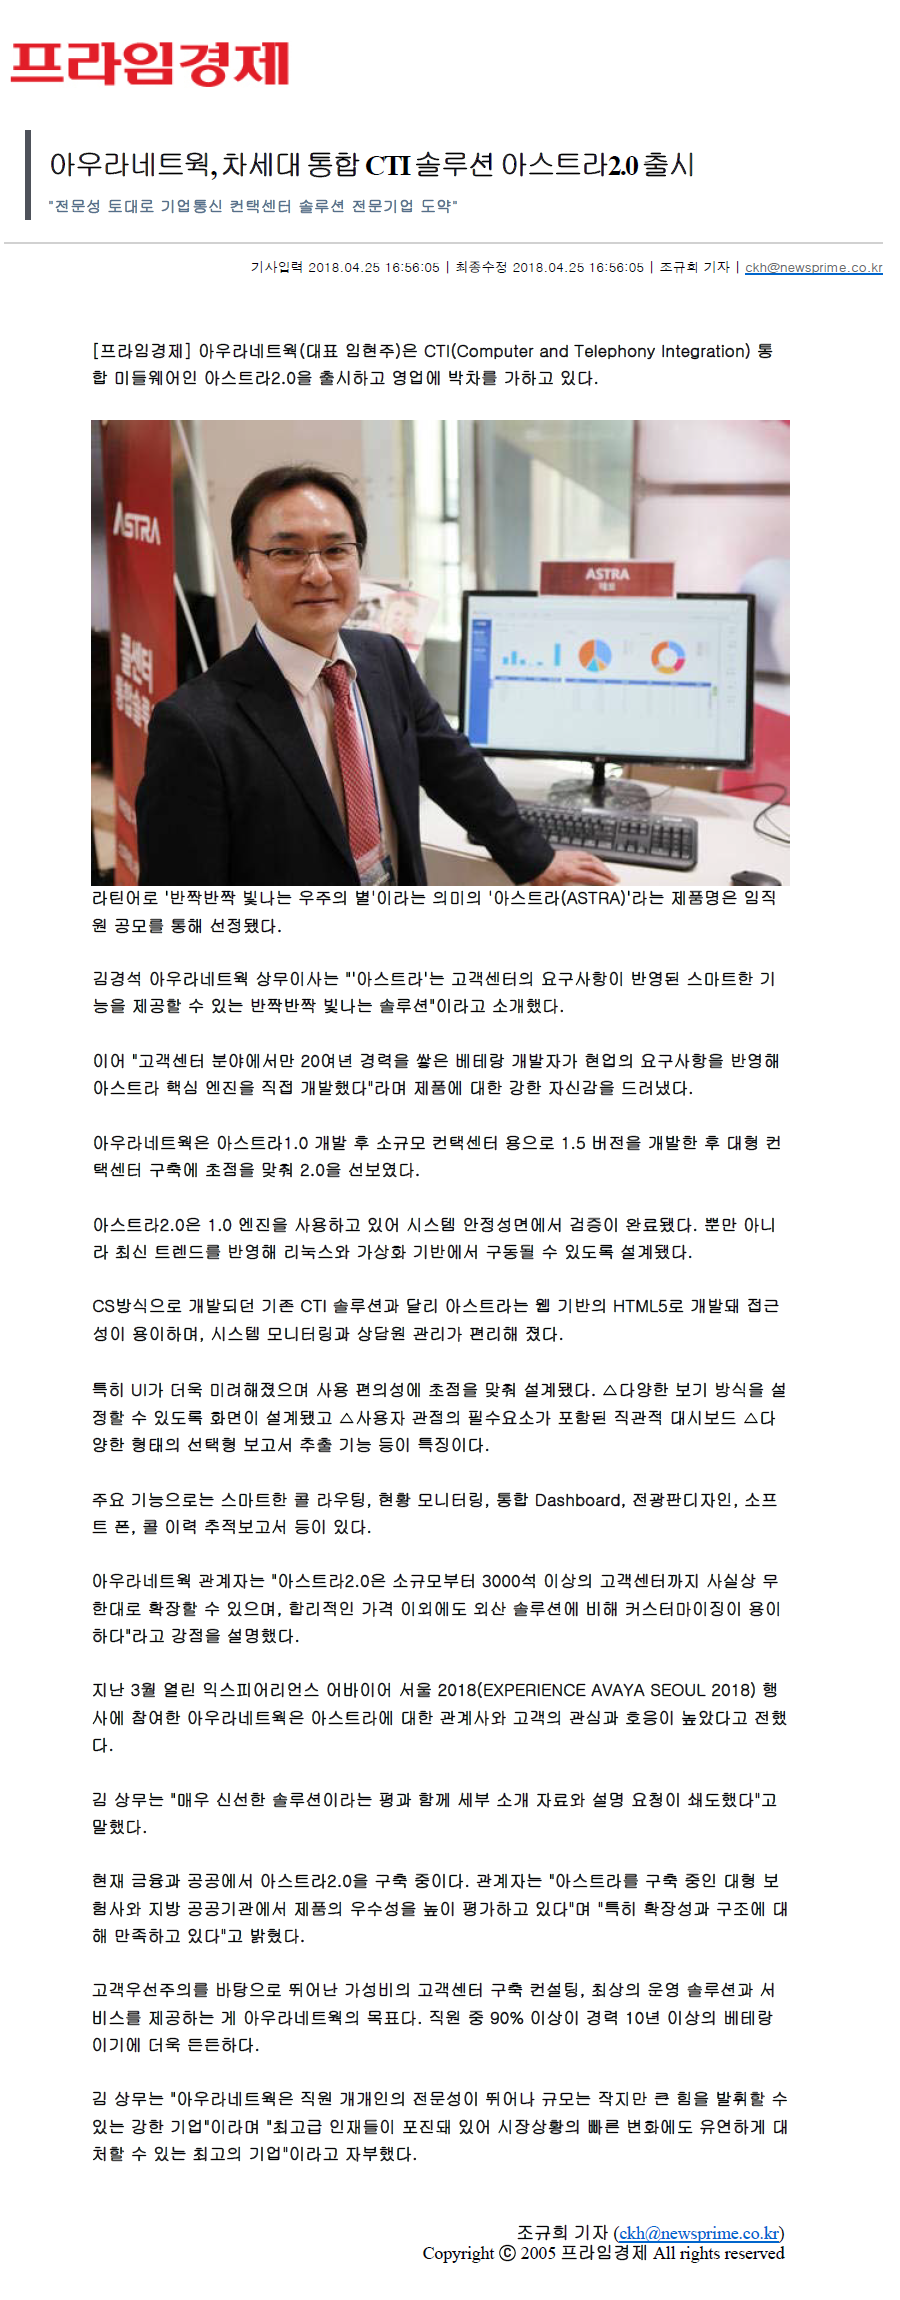 20180425_PrimeEconomy_newspaper_auranetwork.png